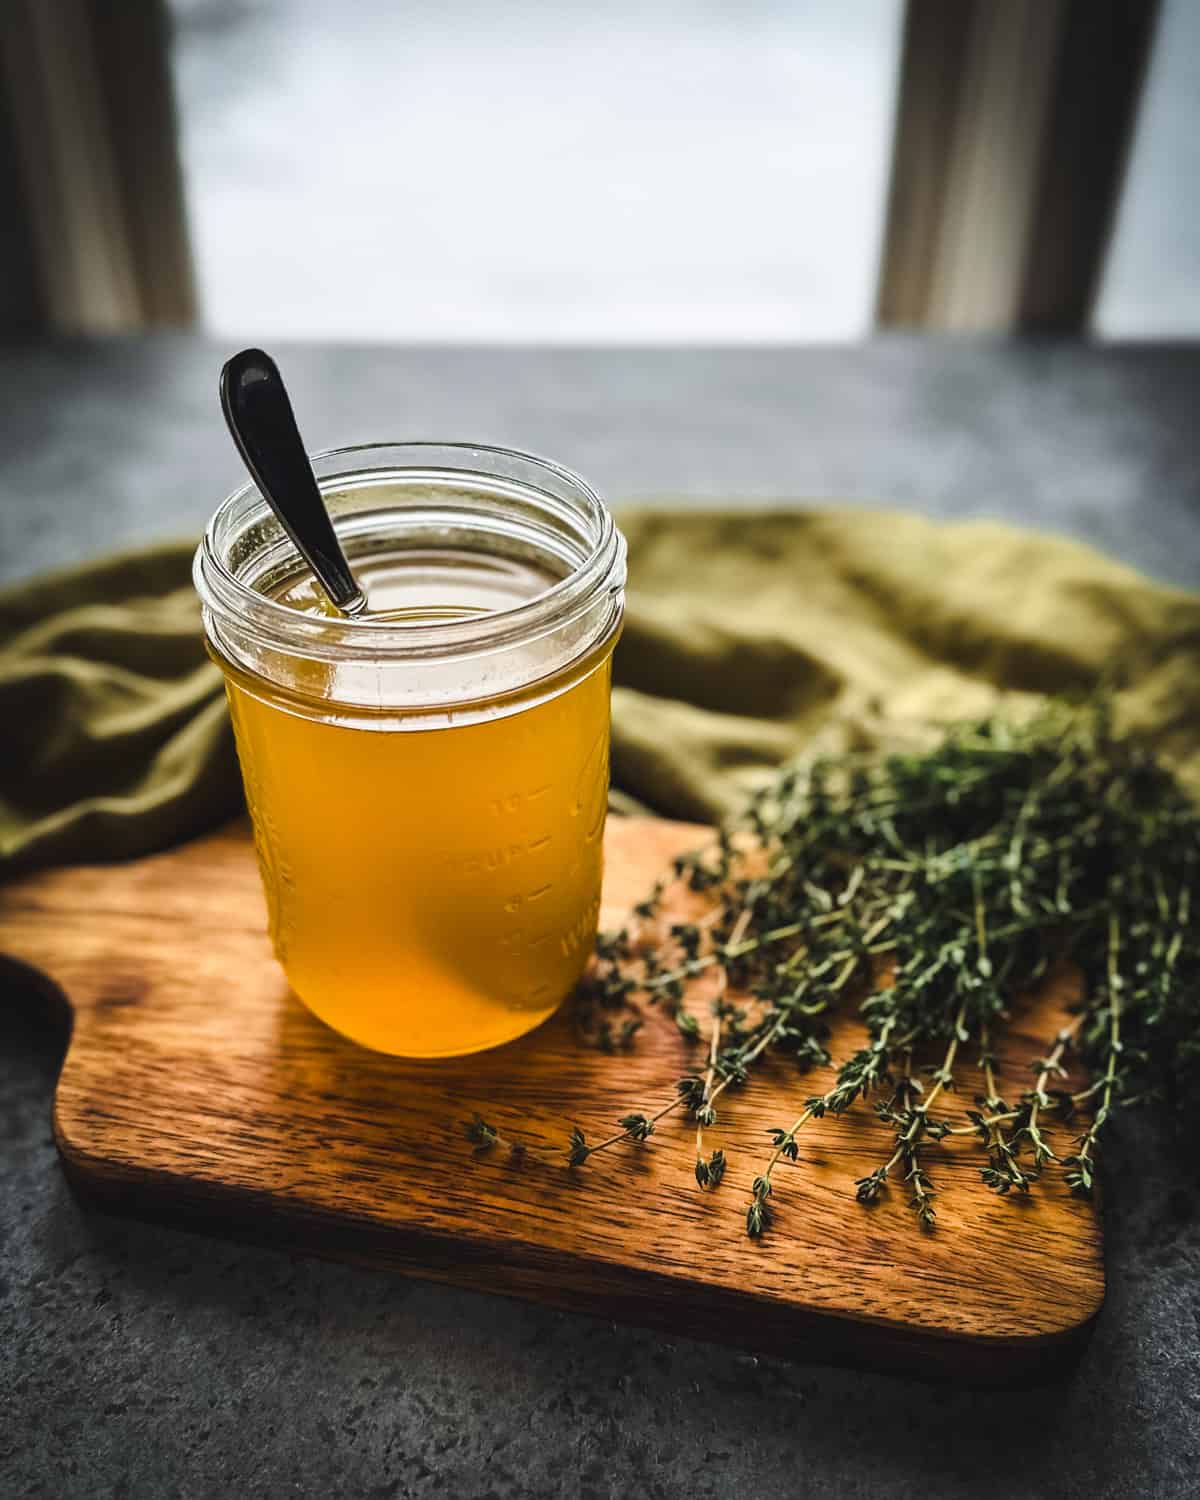 A jar of thyme cough syrup with a spoon in it, on a wood cutting board, surrounded by fresh thyme and an olive green cloth.